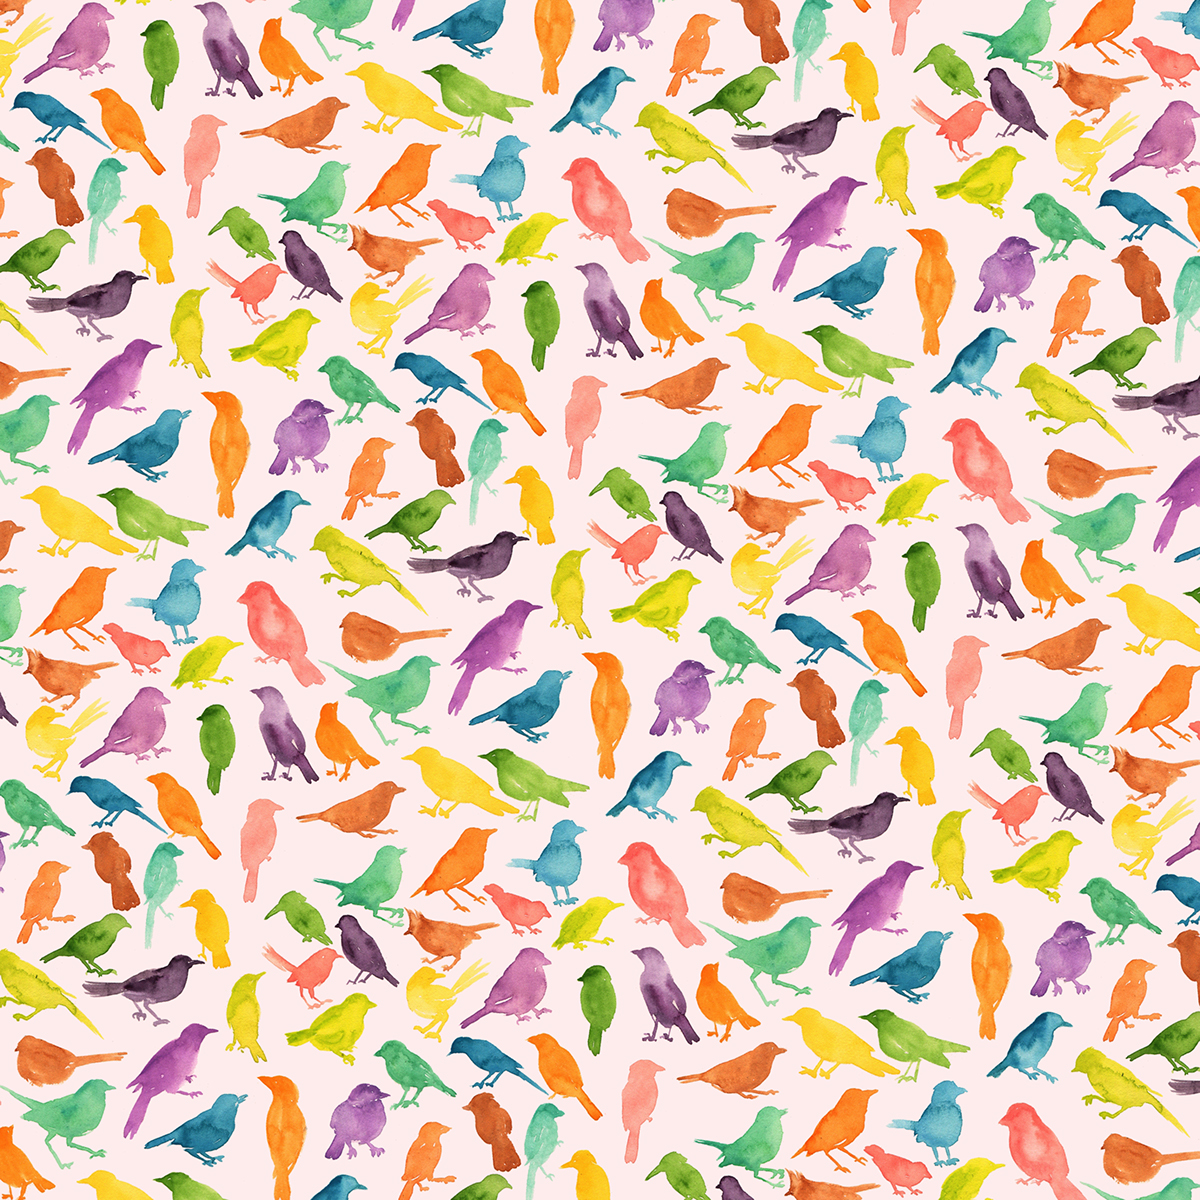 bird pattern pendrawing okart iphone5 background screen people Character